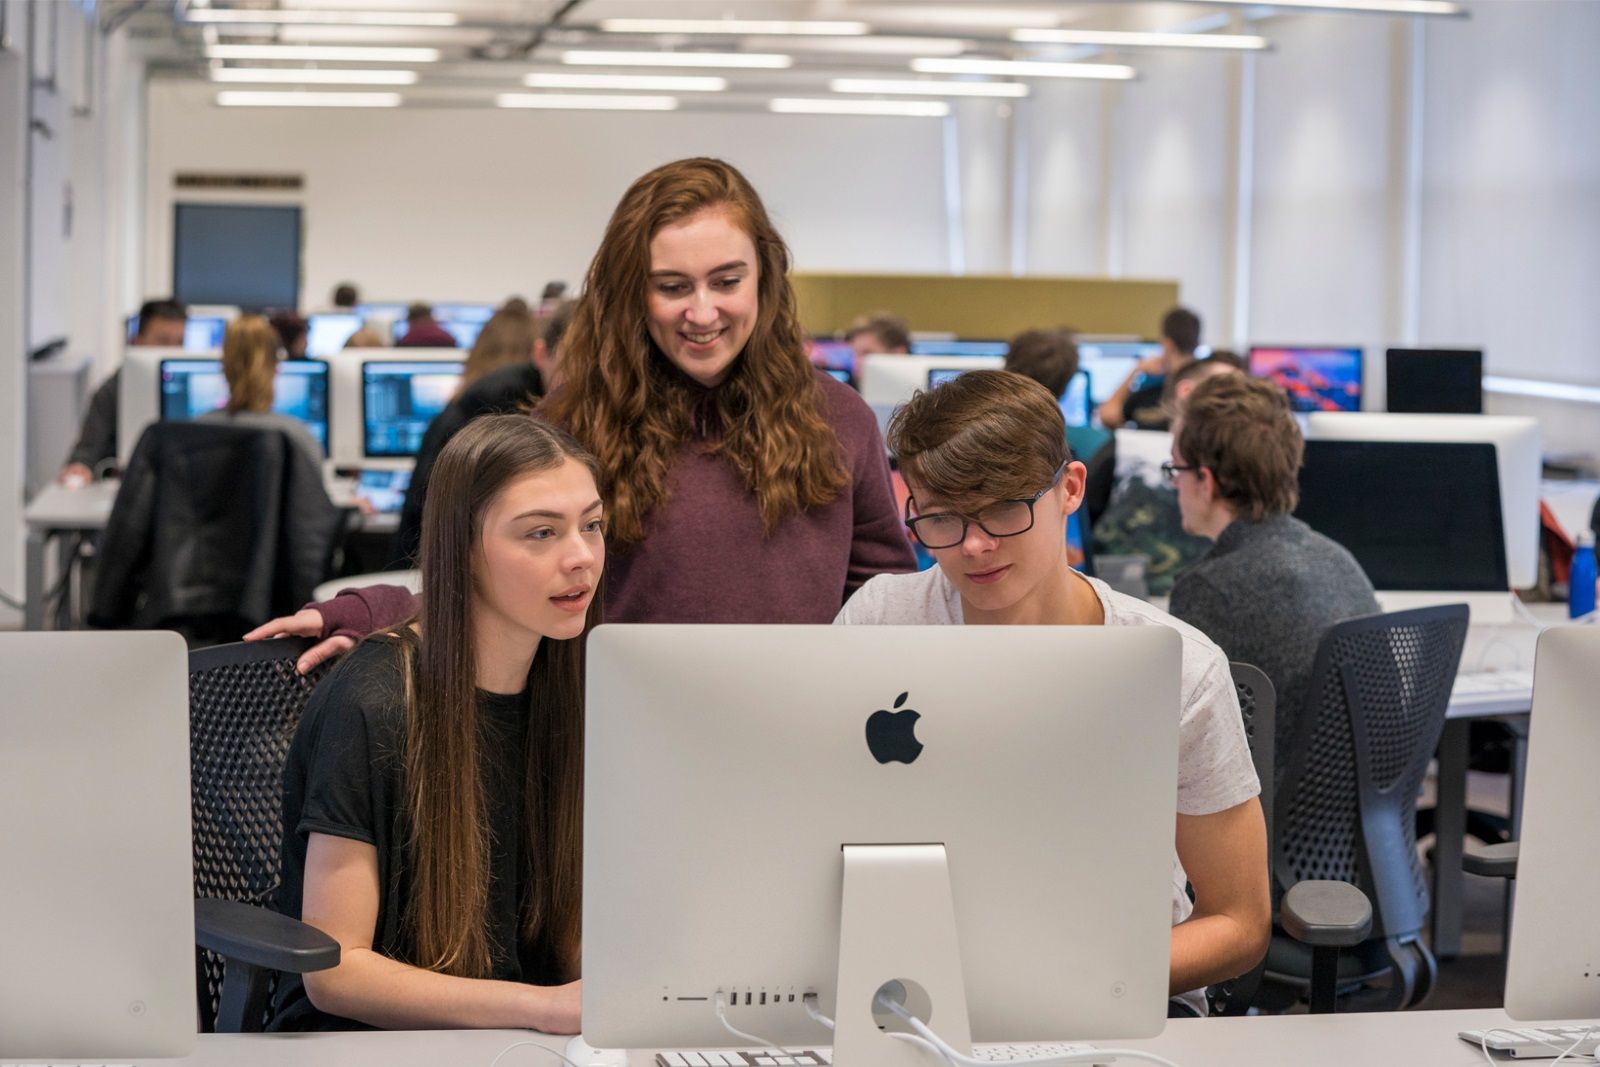 Apple has a UK silicon design team - and has opened its doors to inspire kids image 1